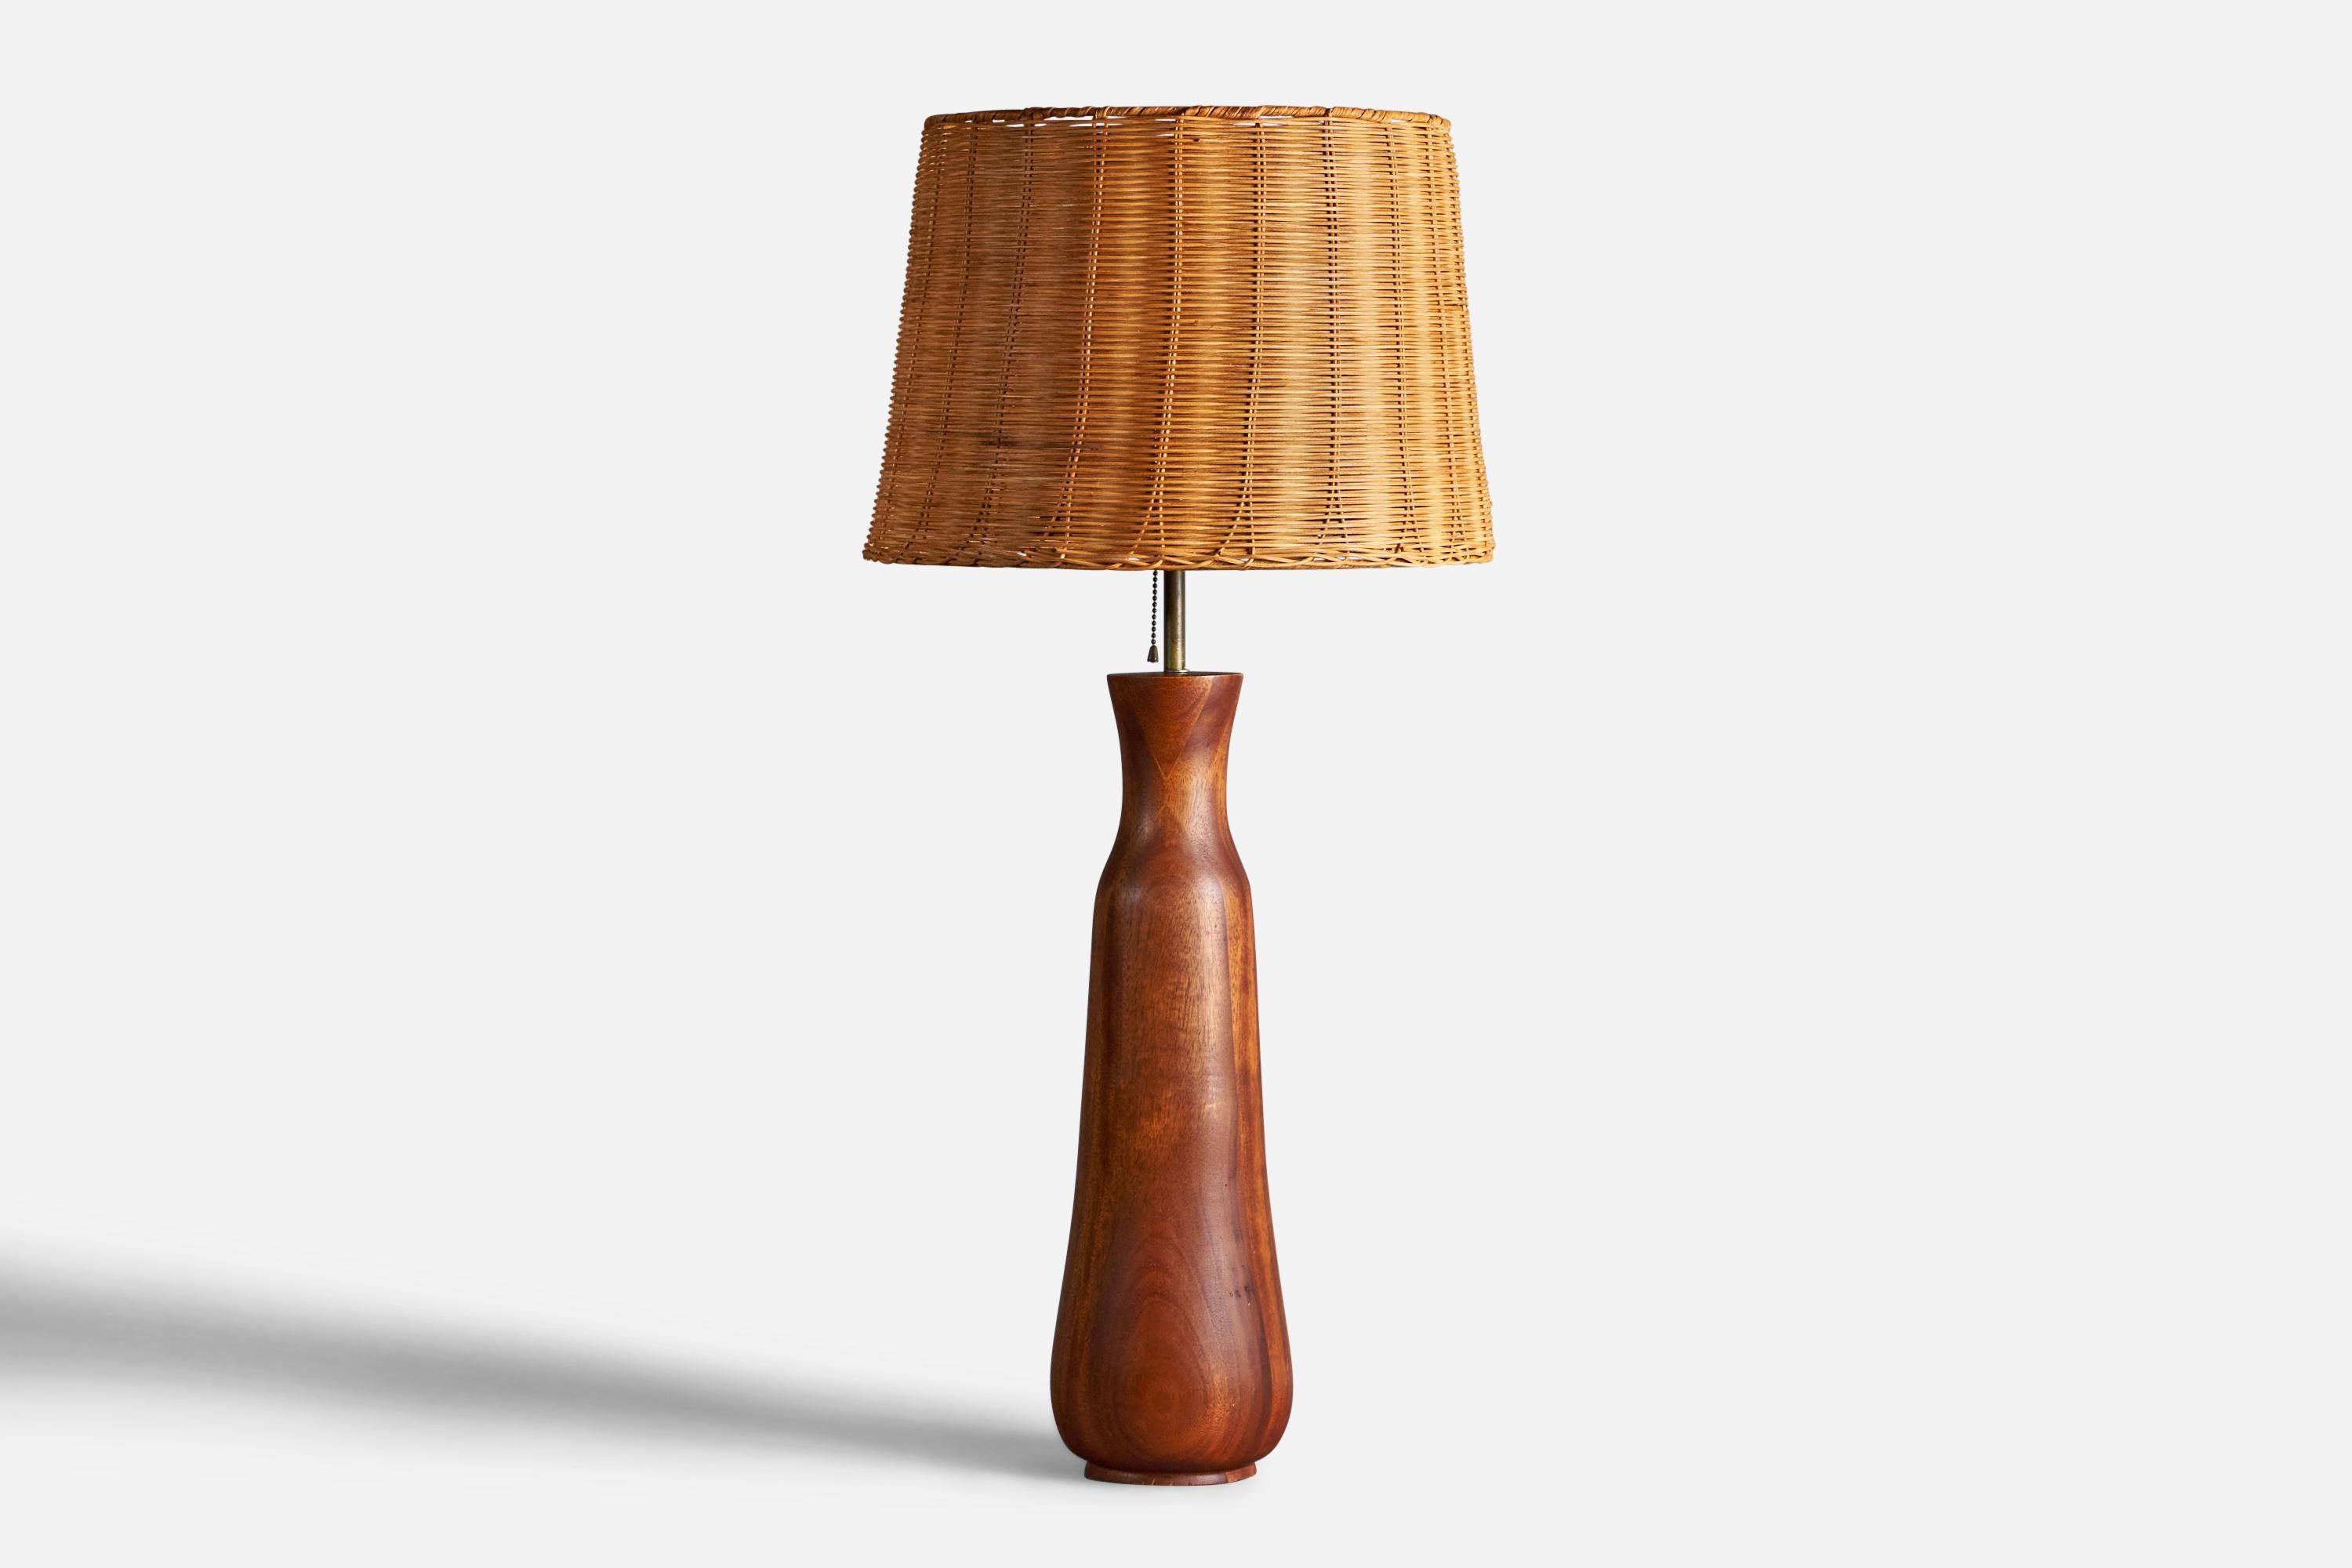 A sizeable teak, brass and rattan table lamp designed and produced in the US, c. 1950s.

Overall Dimensions (inches): 36” H x 16.5” Diameter
Bulb Specifications: E-26 Bulb
Number of Sockets: 1